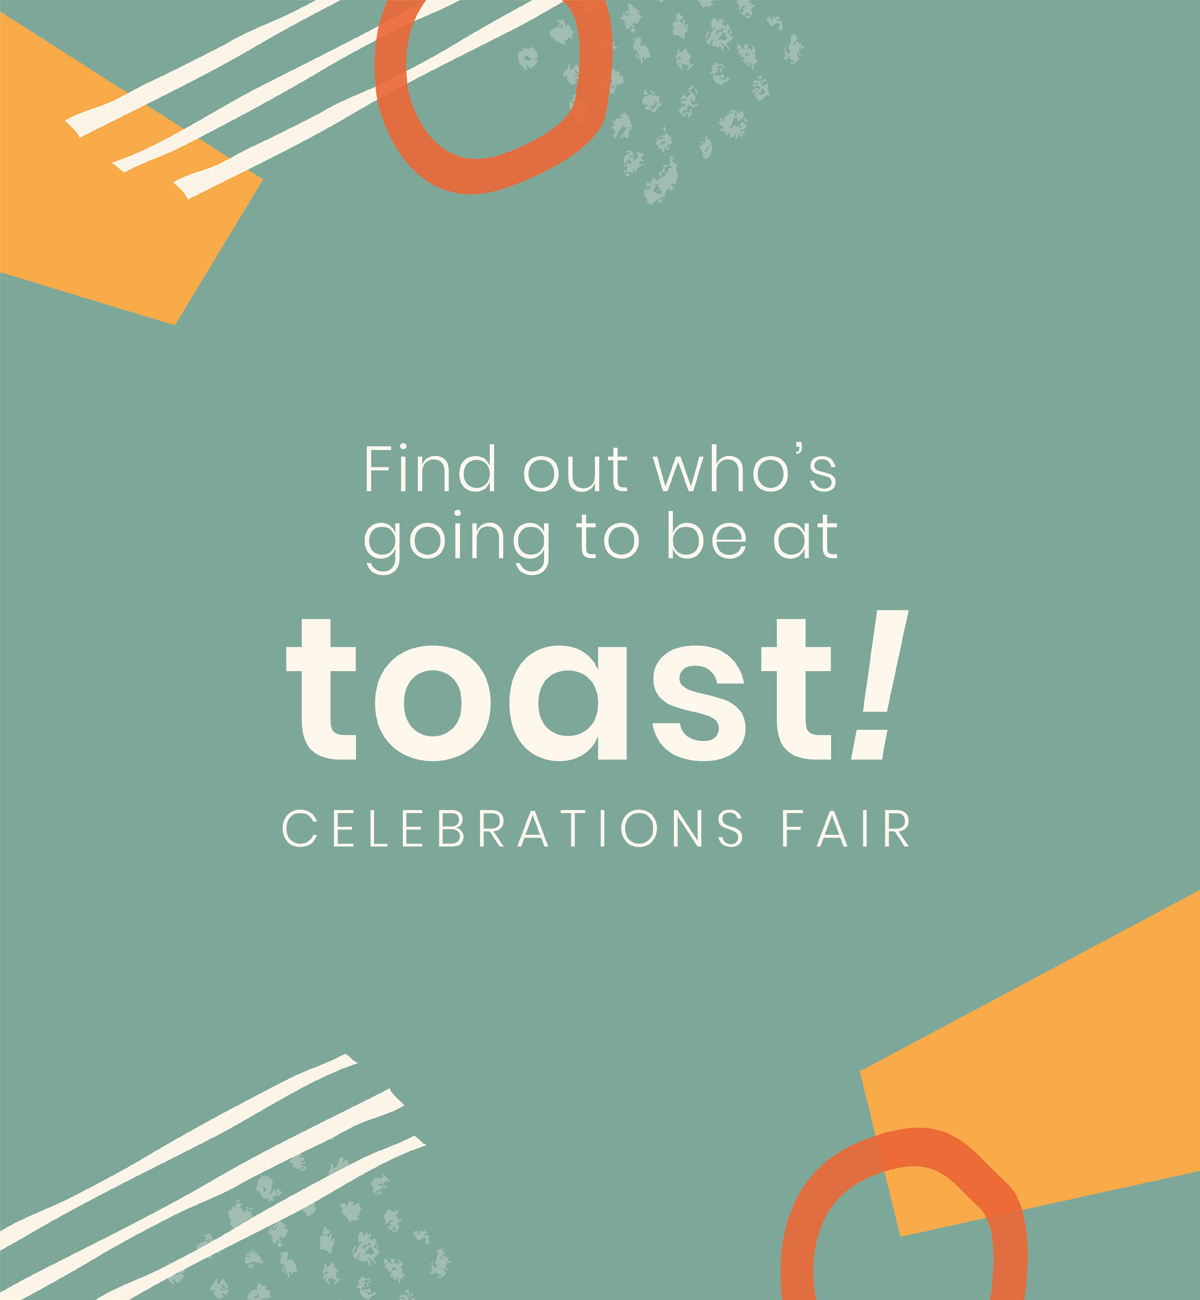 Find out who's going to be at toast! Celebrations Fair